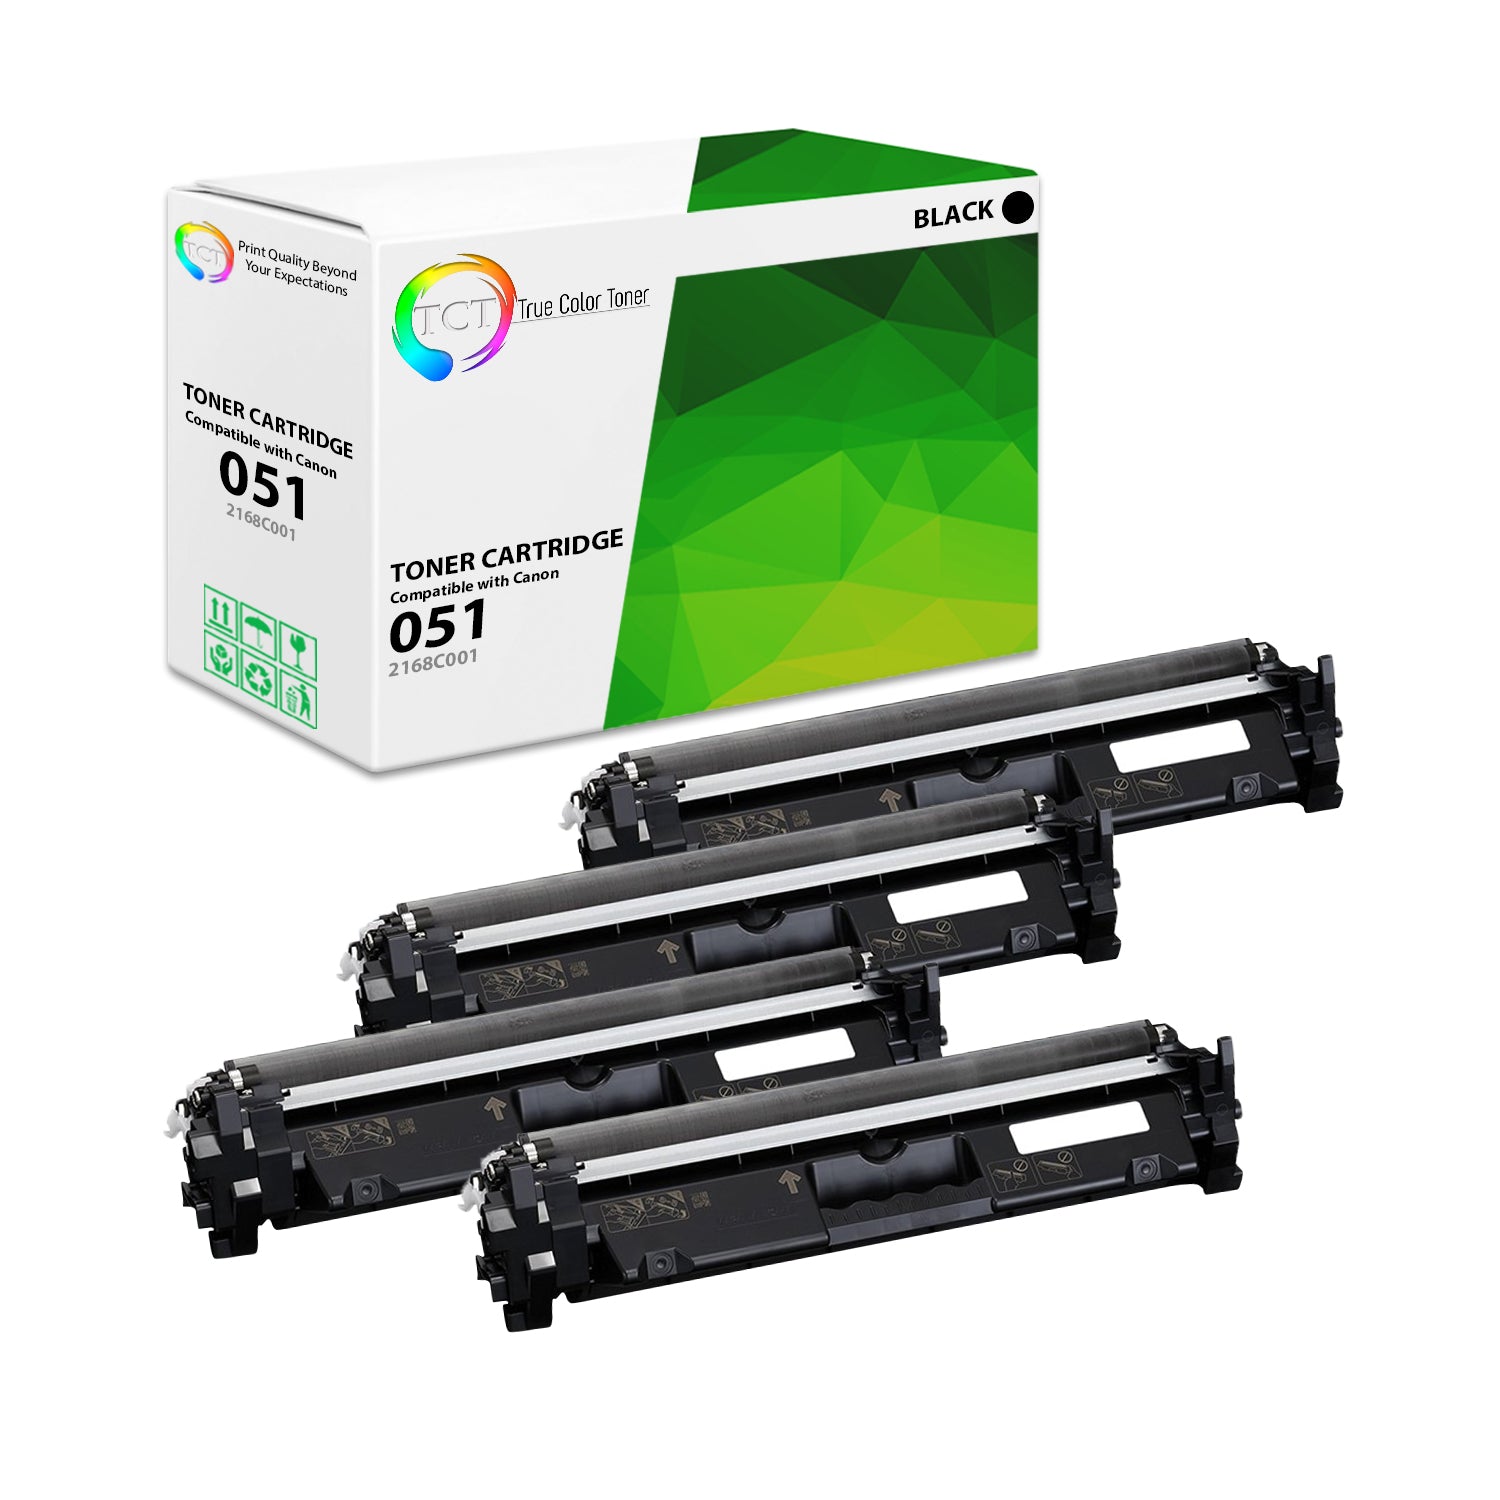 TCT Compatible Toner Cartridge Replacement for the Canon 051 Series - 4 Pack Black